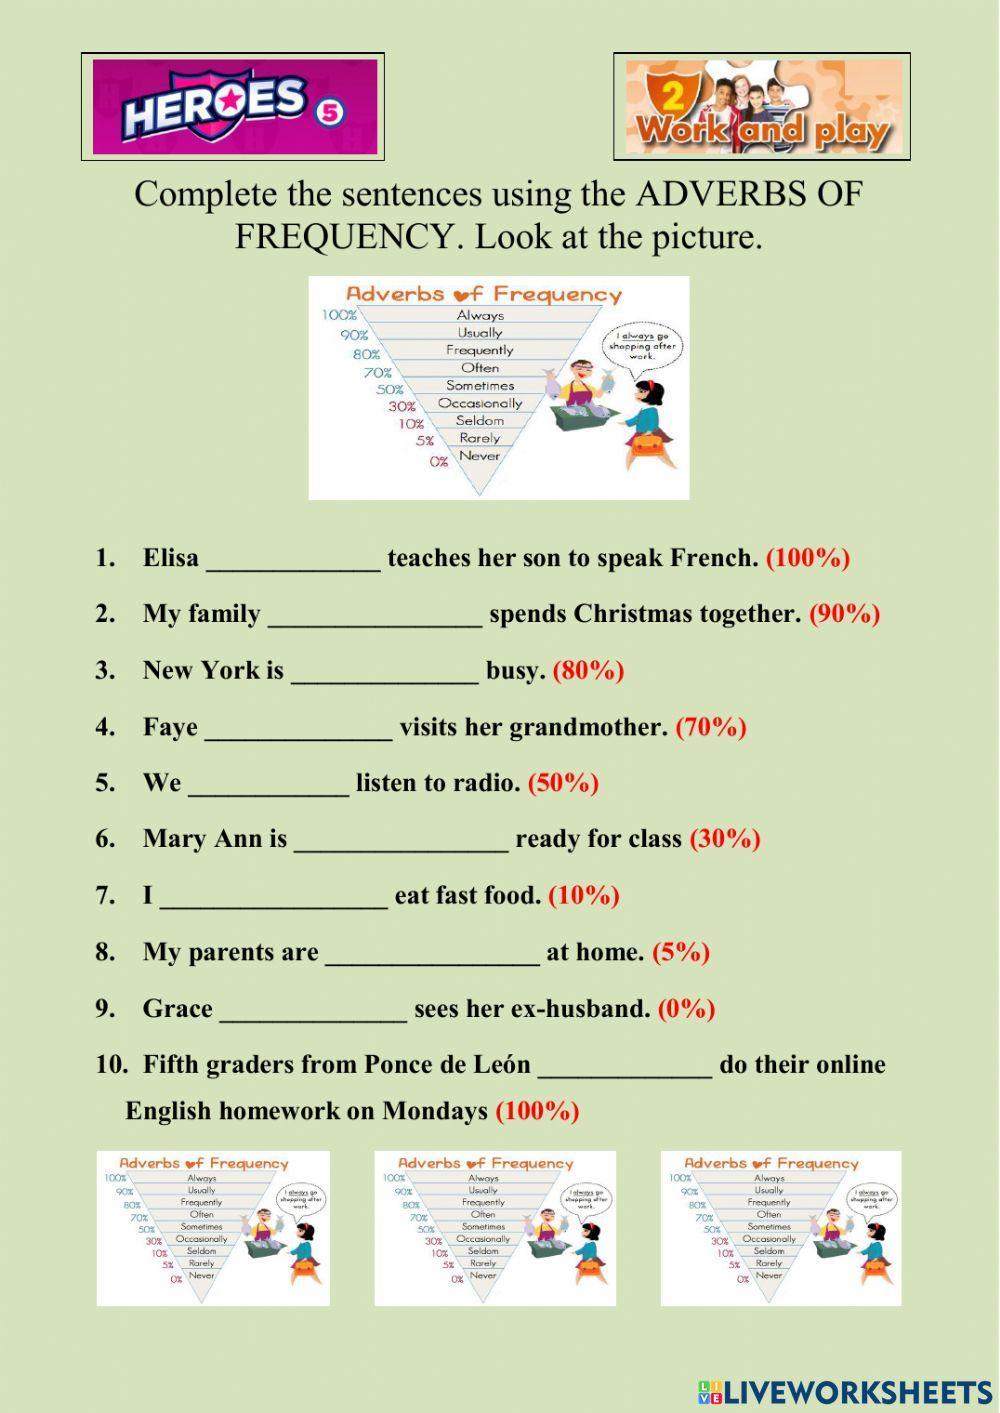 H5U2 Adverbs of frequency